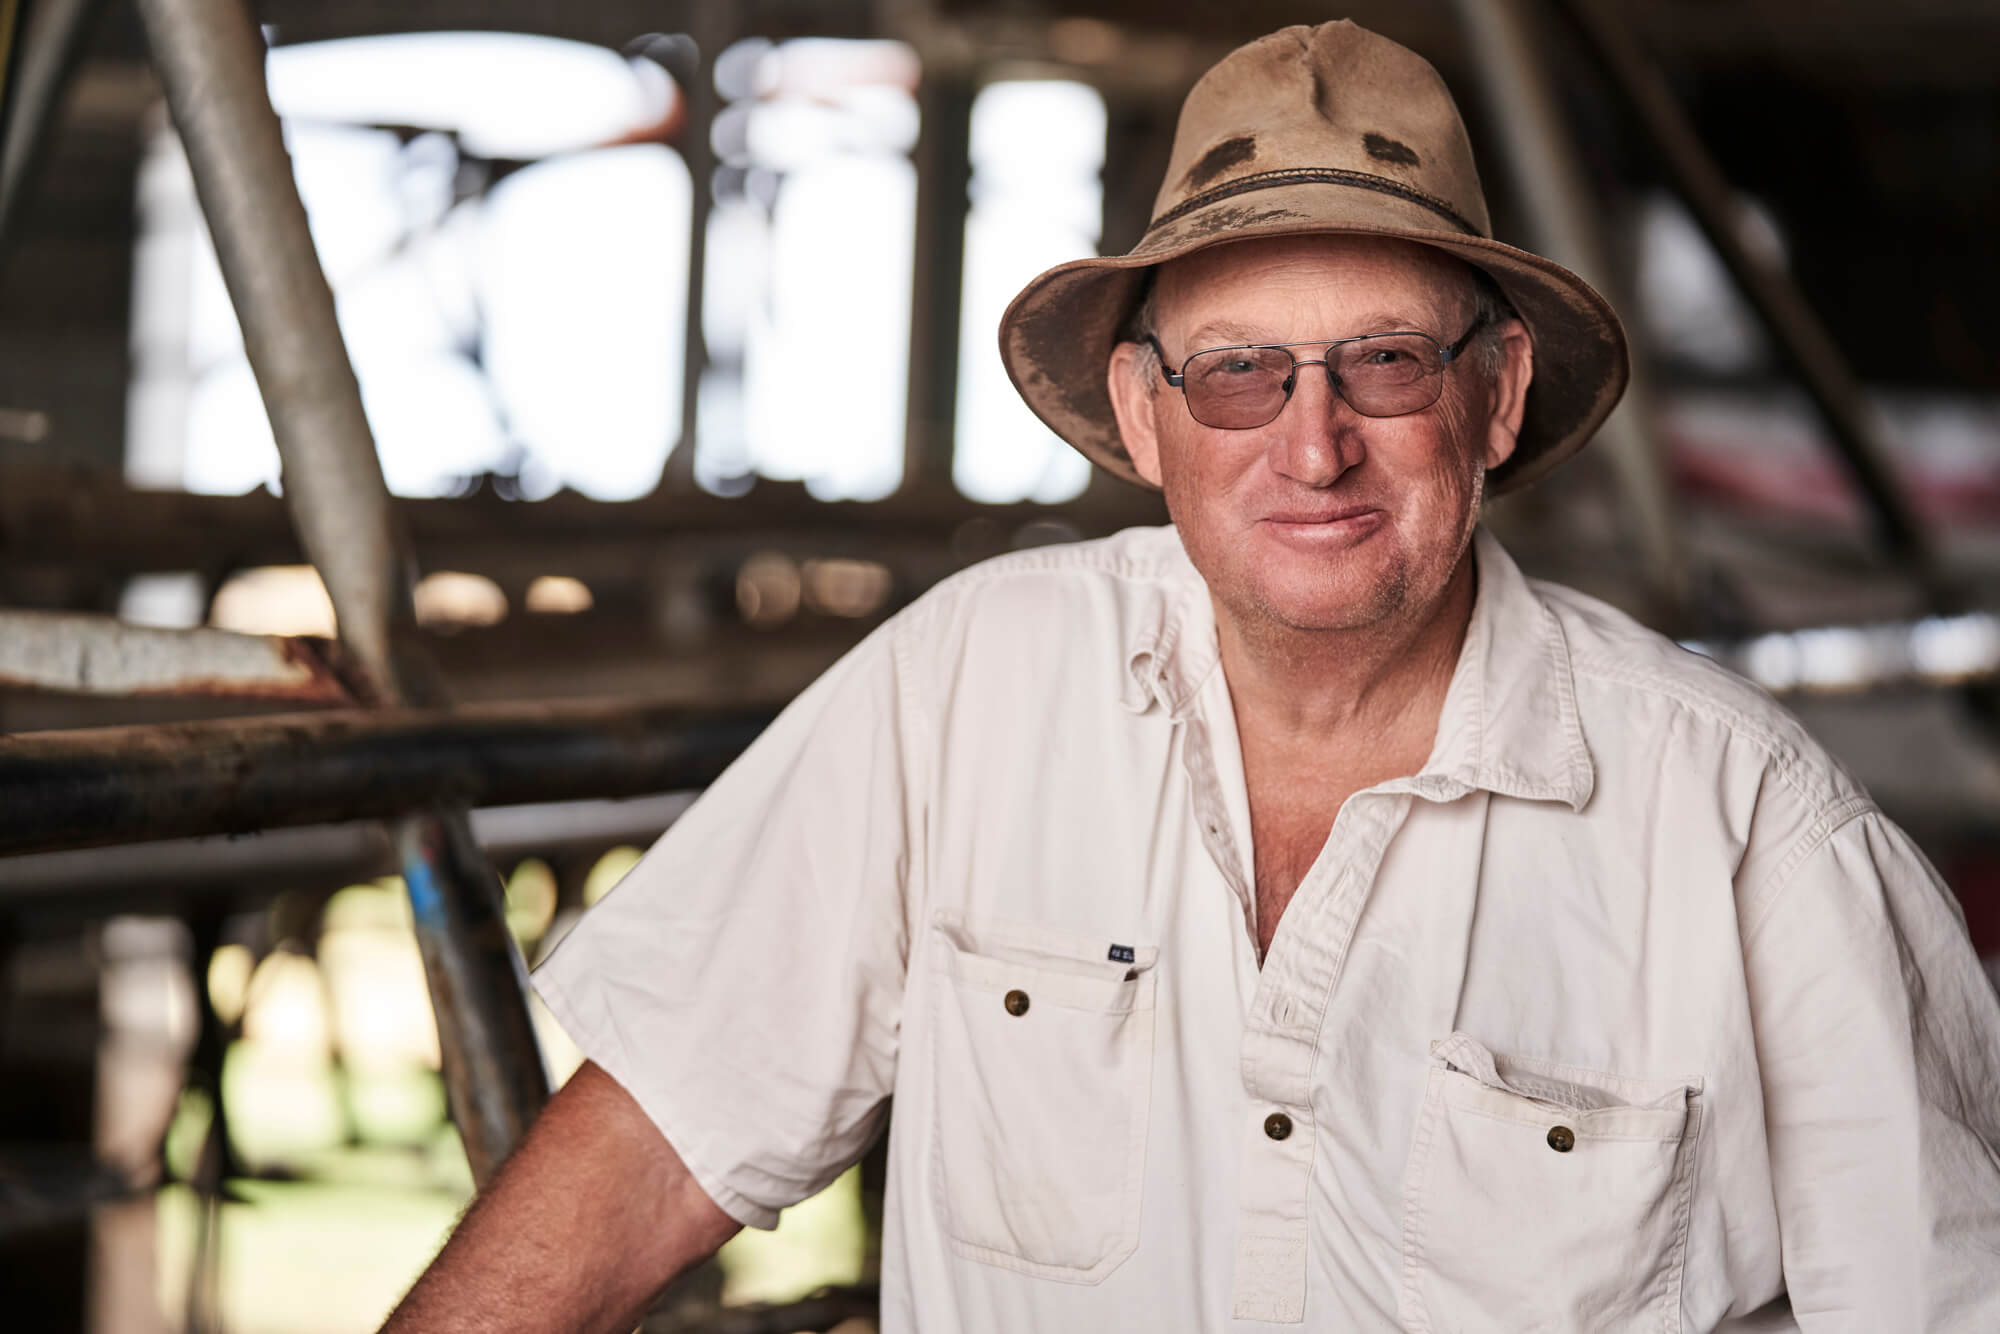 A happy Gippsland Victoria dairy farmer on the milking run, a client of Southern Stockfeeds who has increased milk yields through customised nutritionally balanced pellet feed.